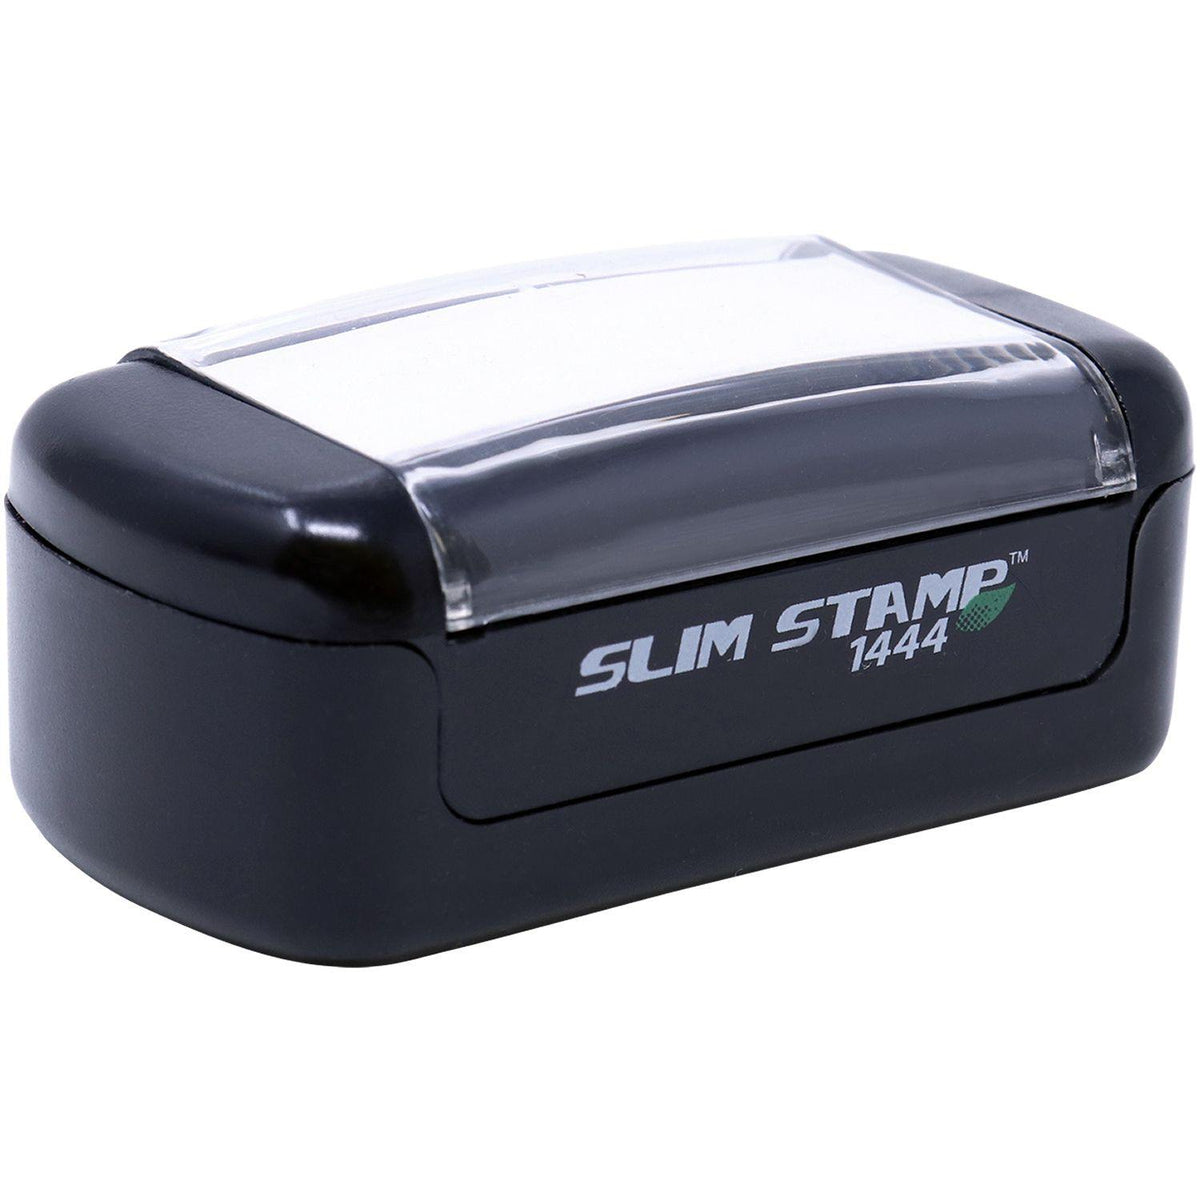 Alt View of Slim Pre-Inked Remitido Stamp Mount Angle